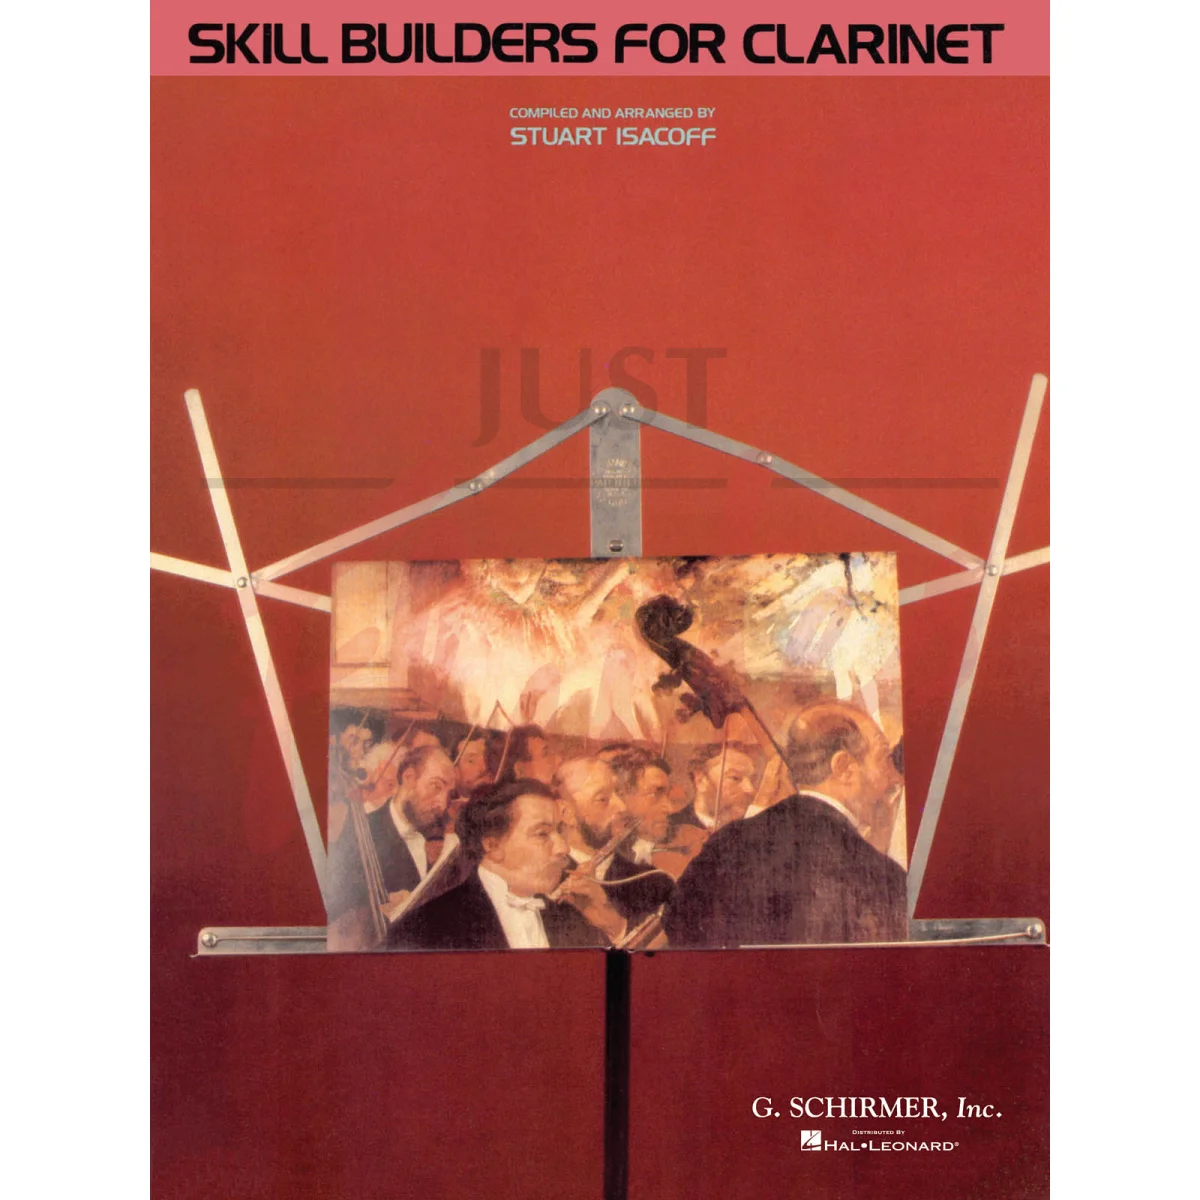 Skill Builders for Clarinet